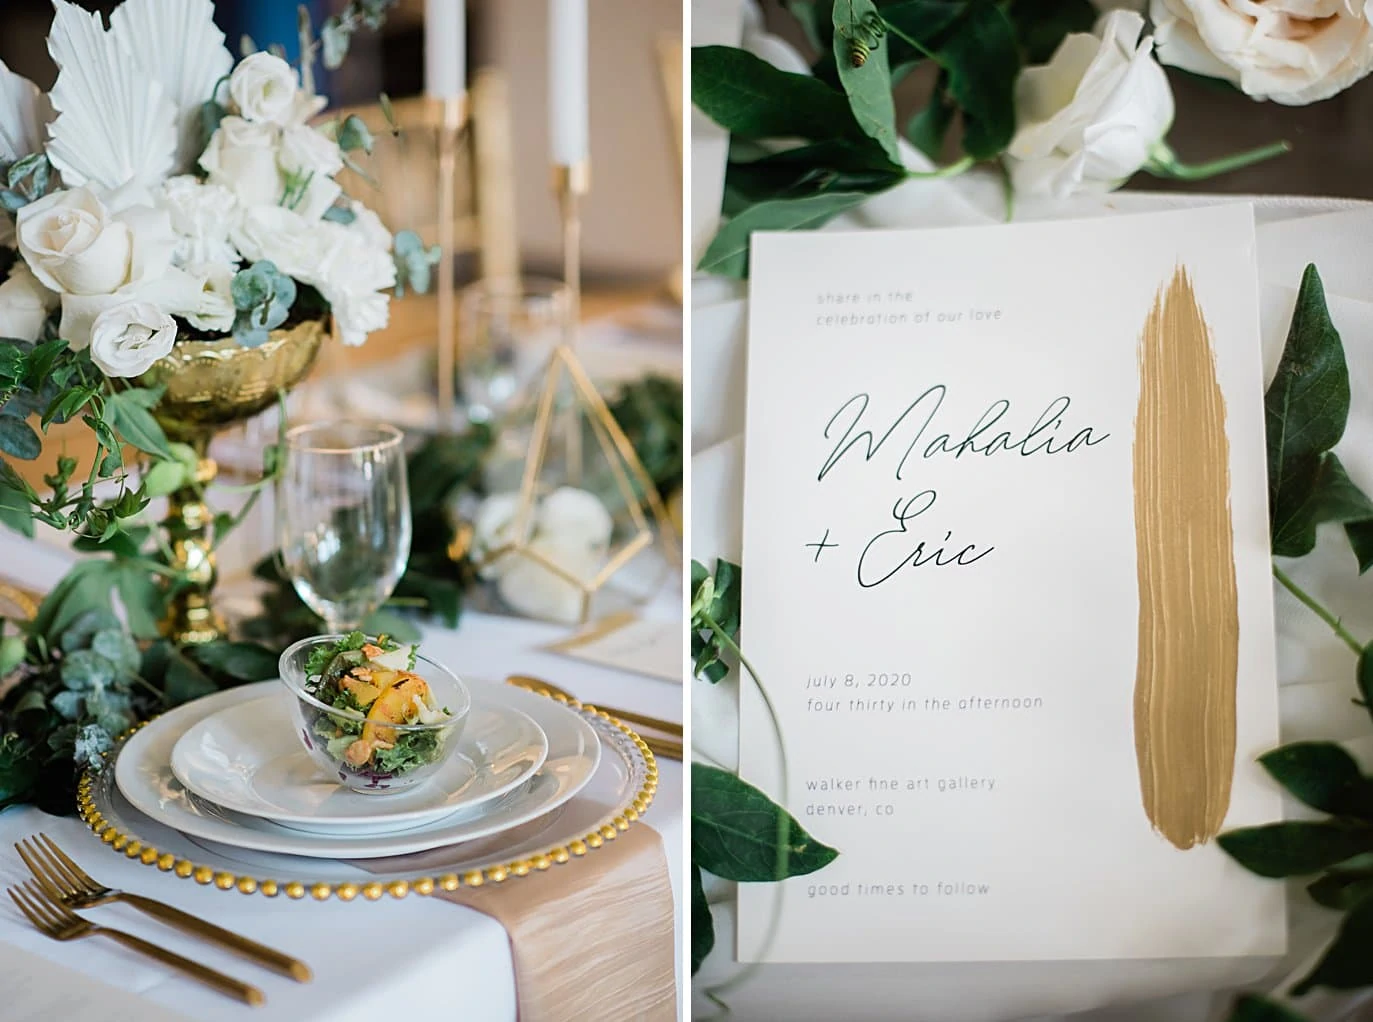 peach salad and gold accents at dinner setting at Walker Fine Art Gallery Wedding by Boulder Wedding Photographer Jennie Crate